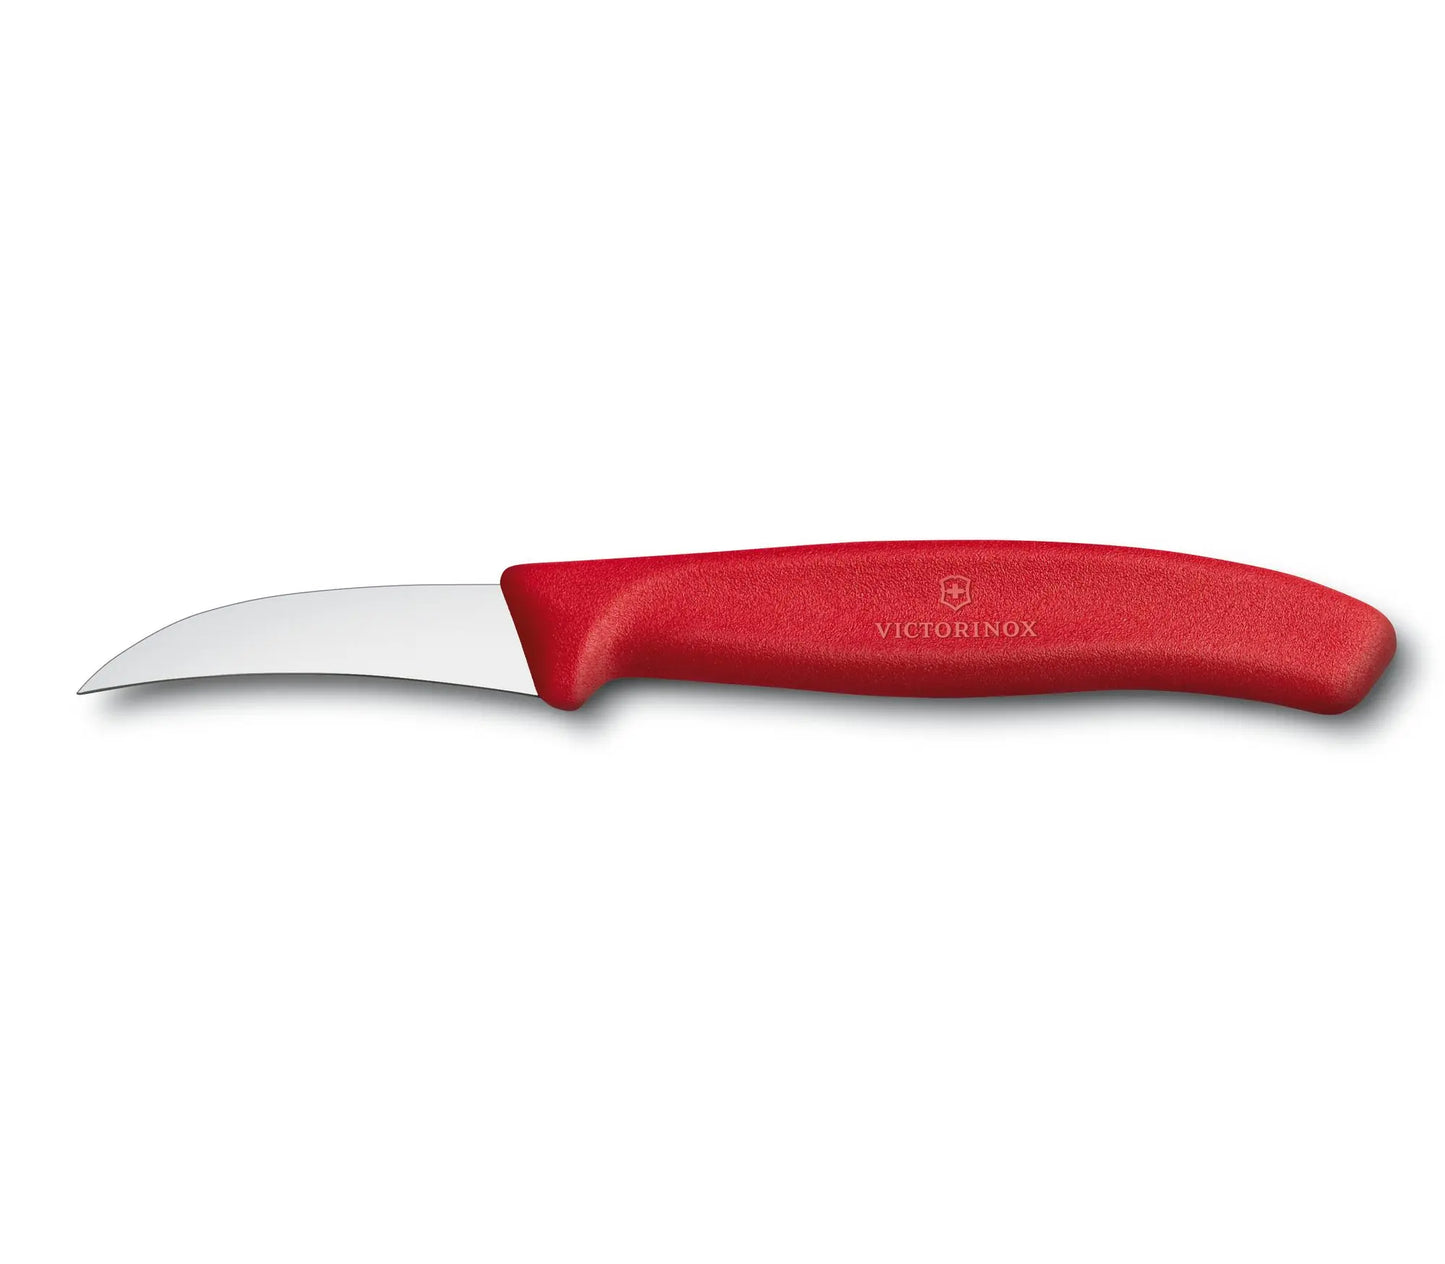 Victorinox Swiss Classic Curved Blade Knife - Red